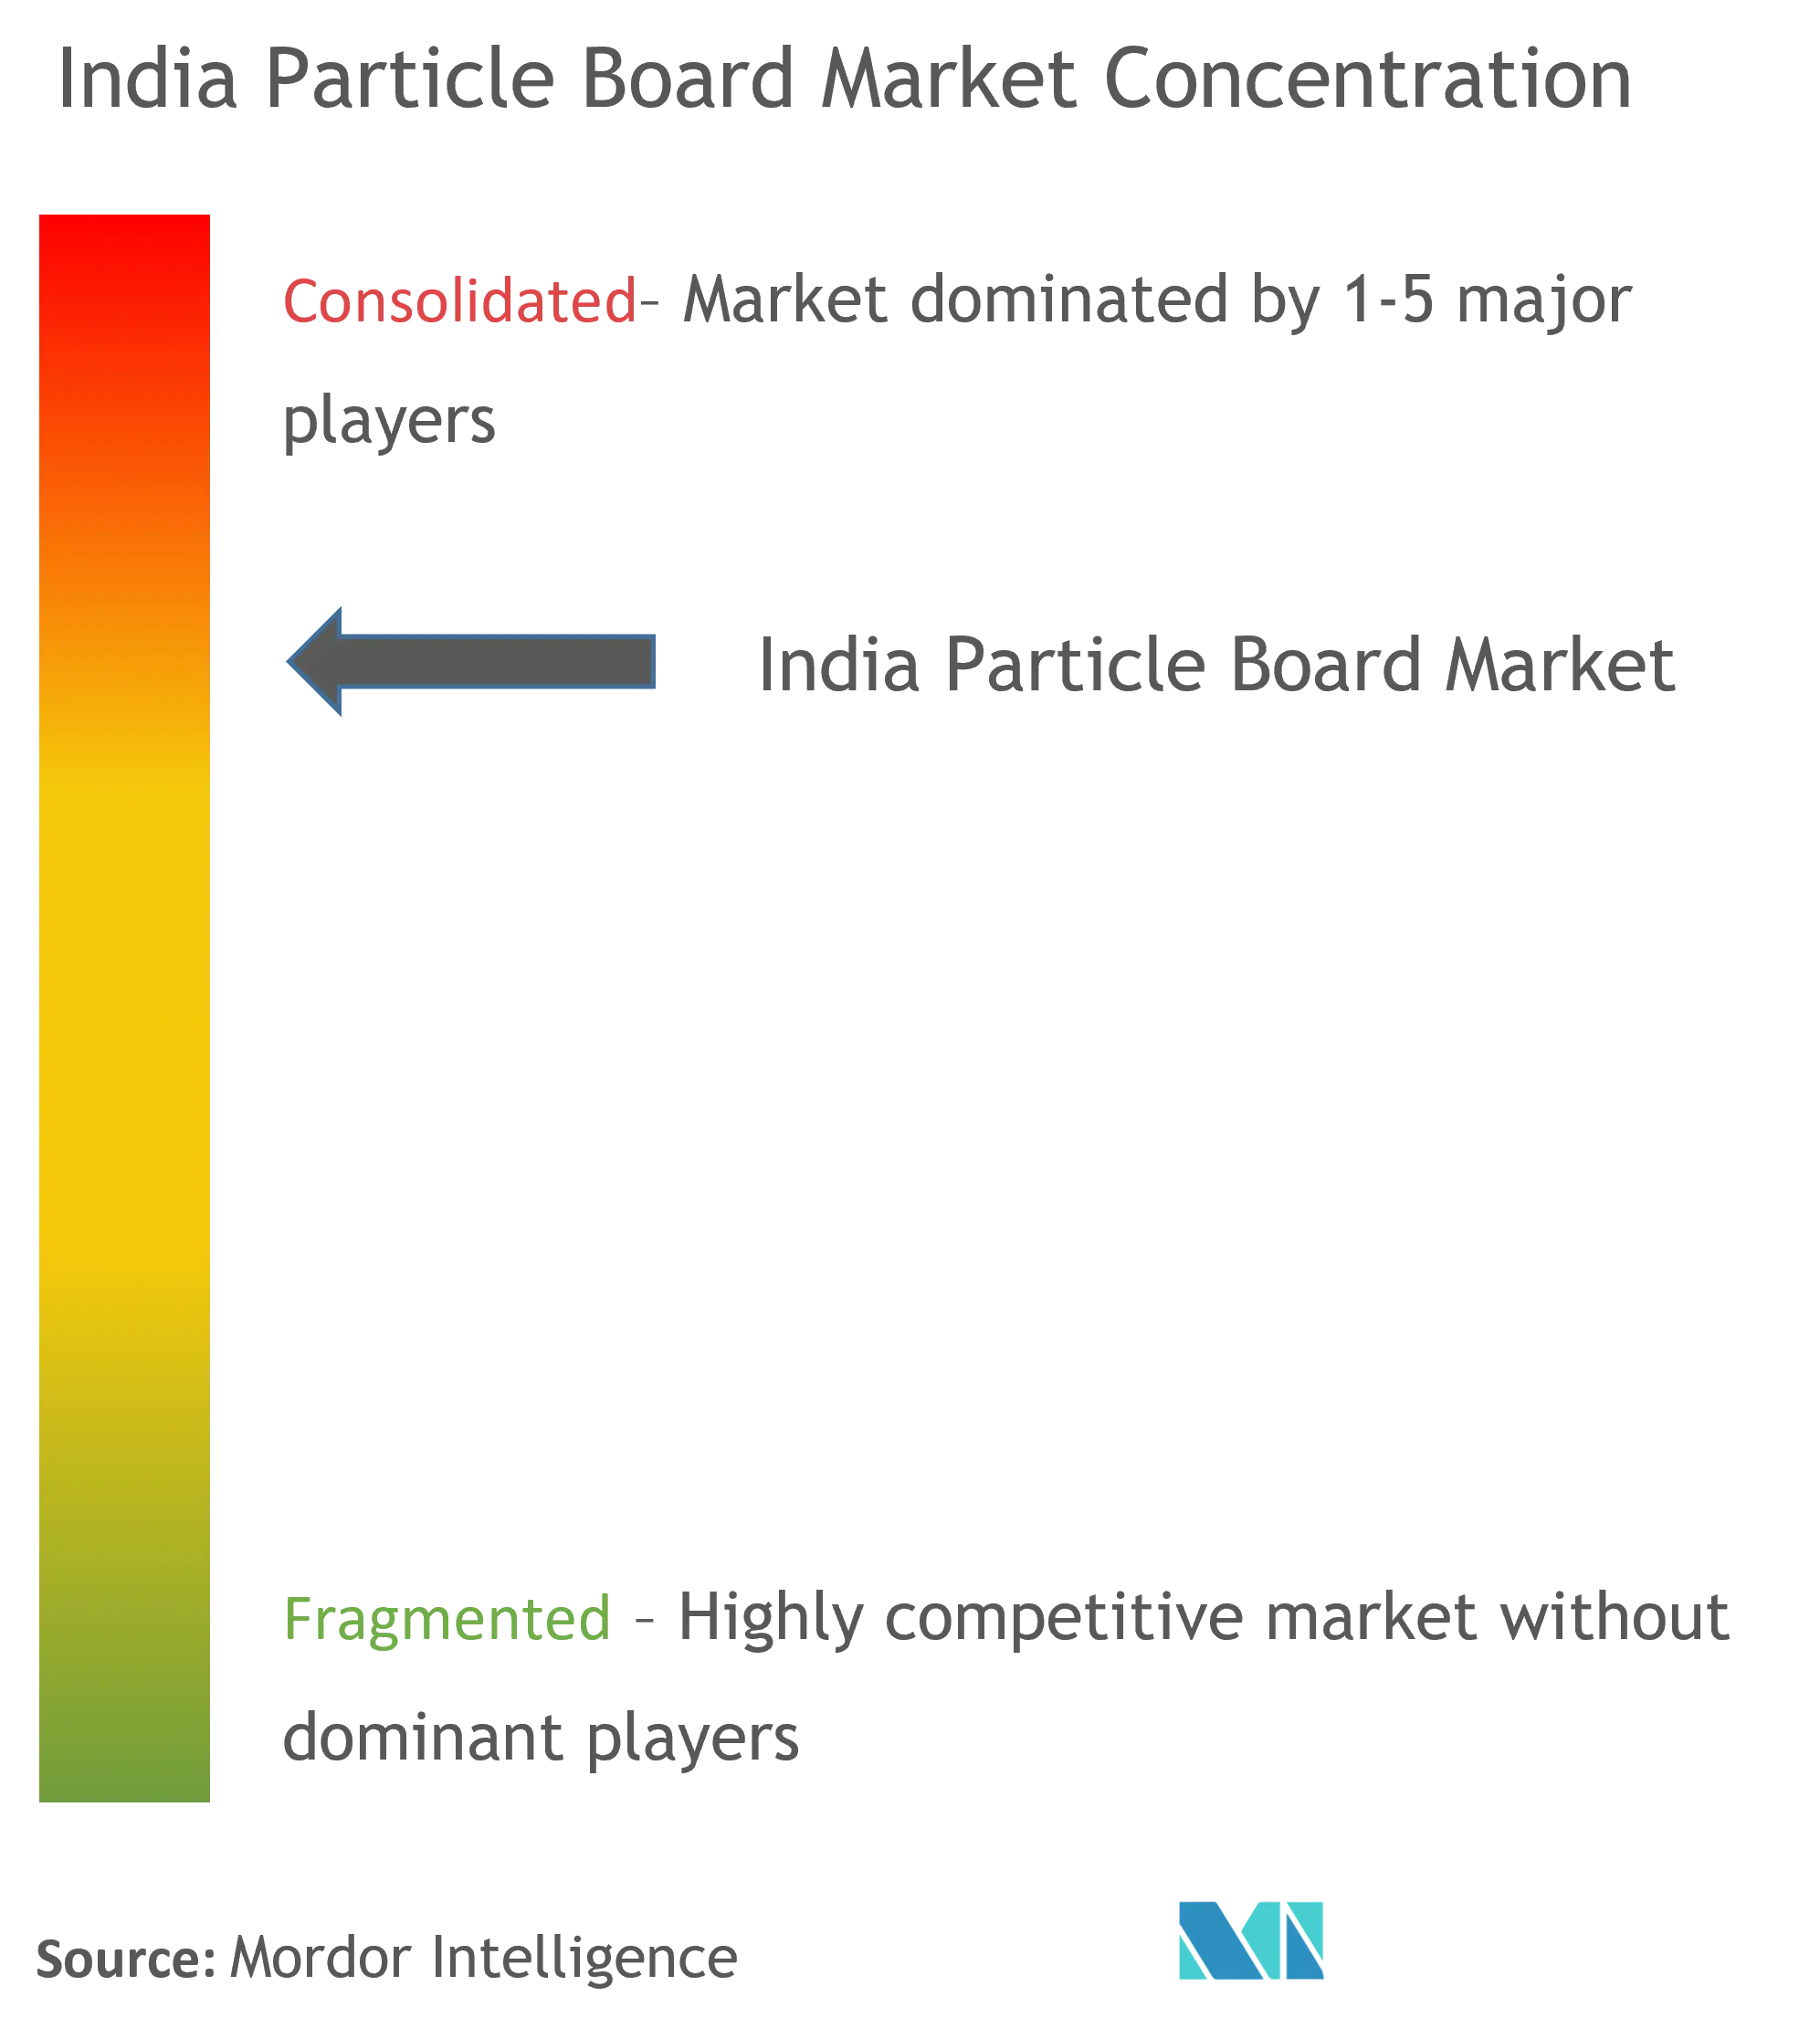 Market Concentration - India Particle Board Market.png